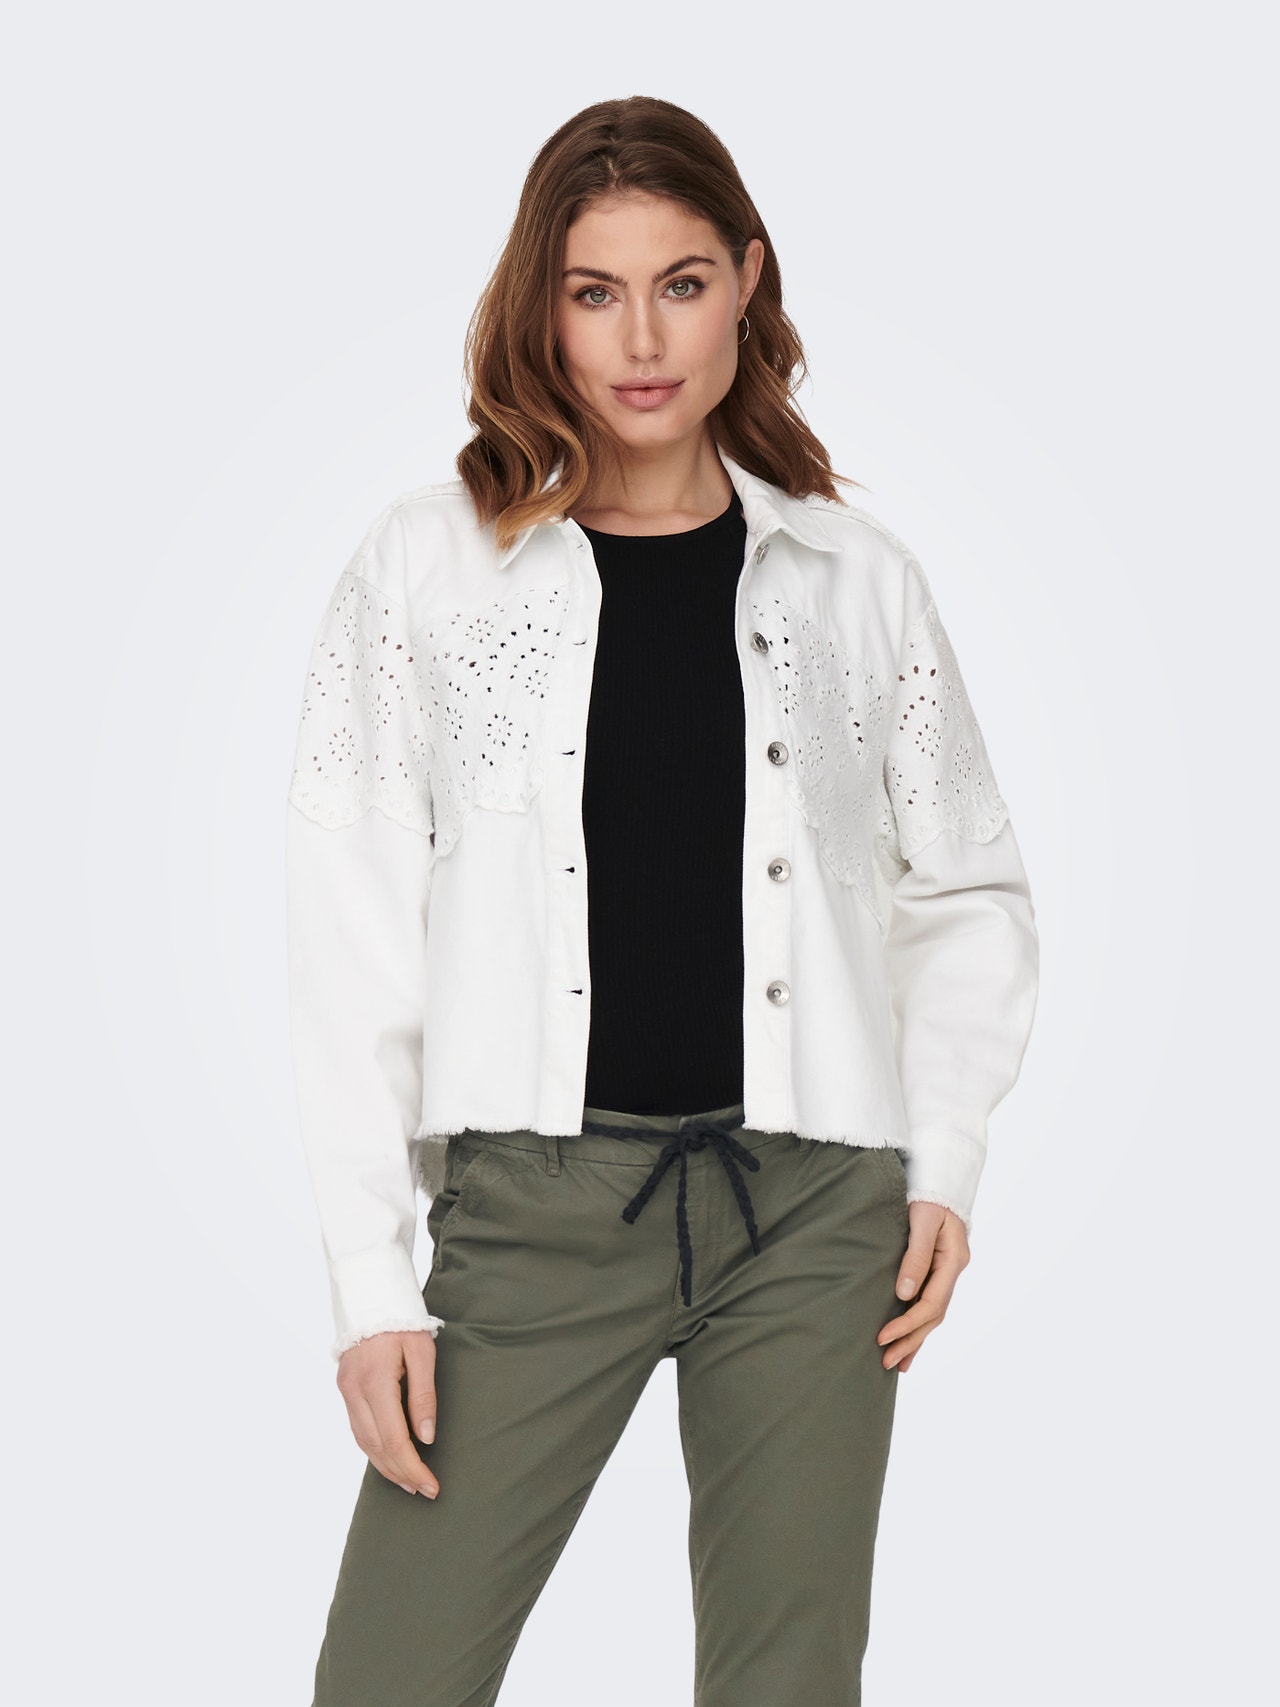 ONLY Jacket with details -Bright White - 15232378